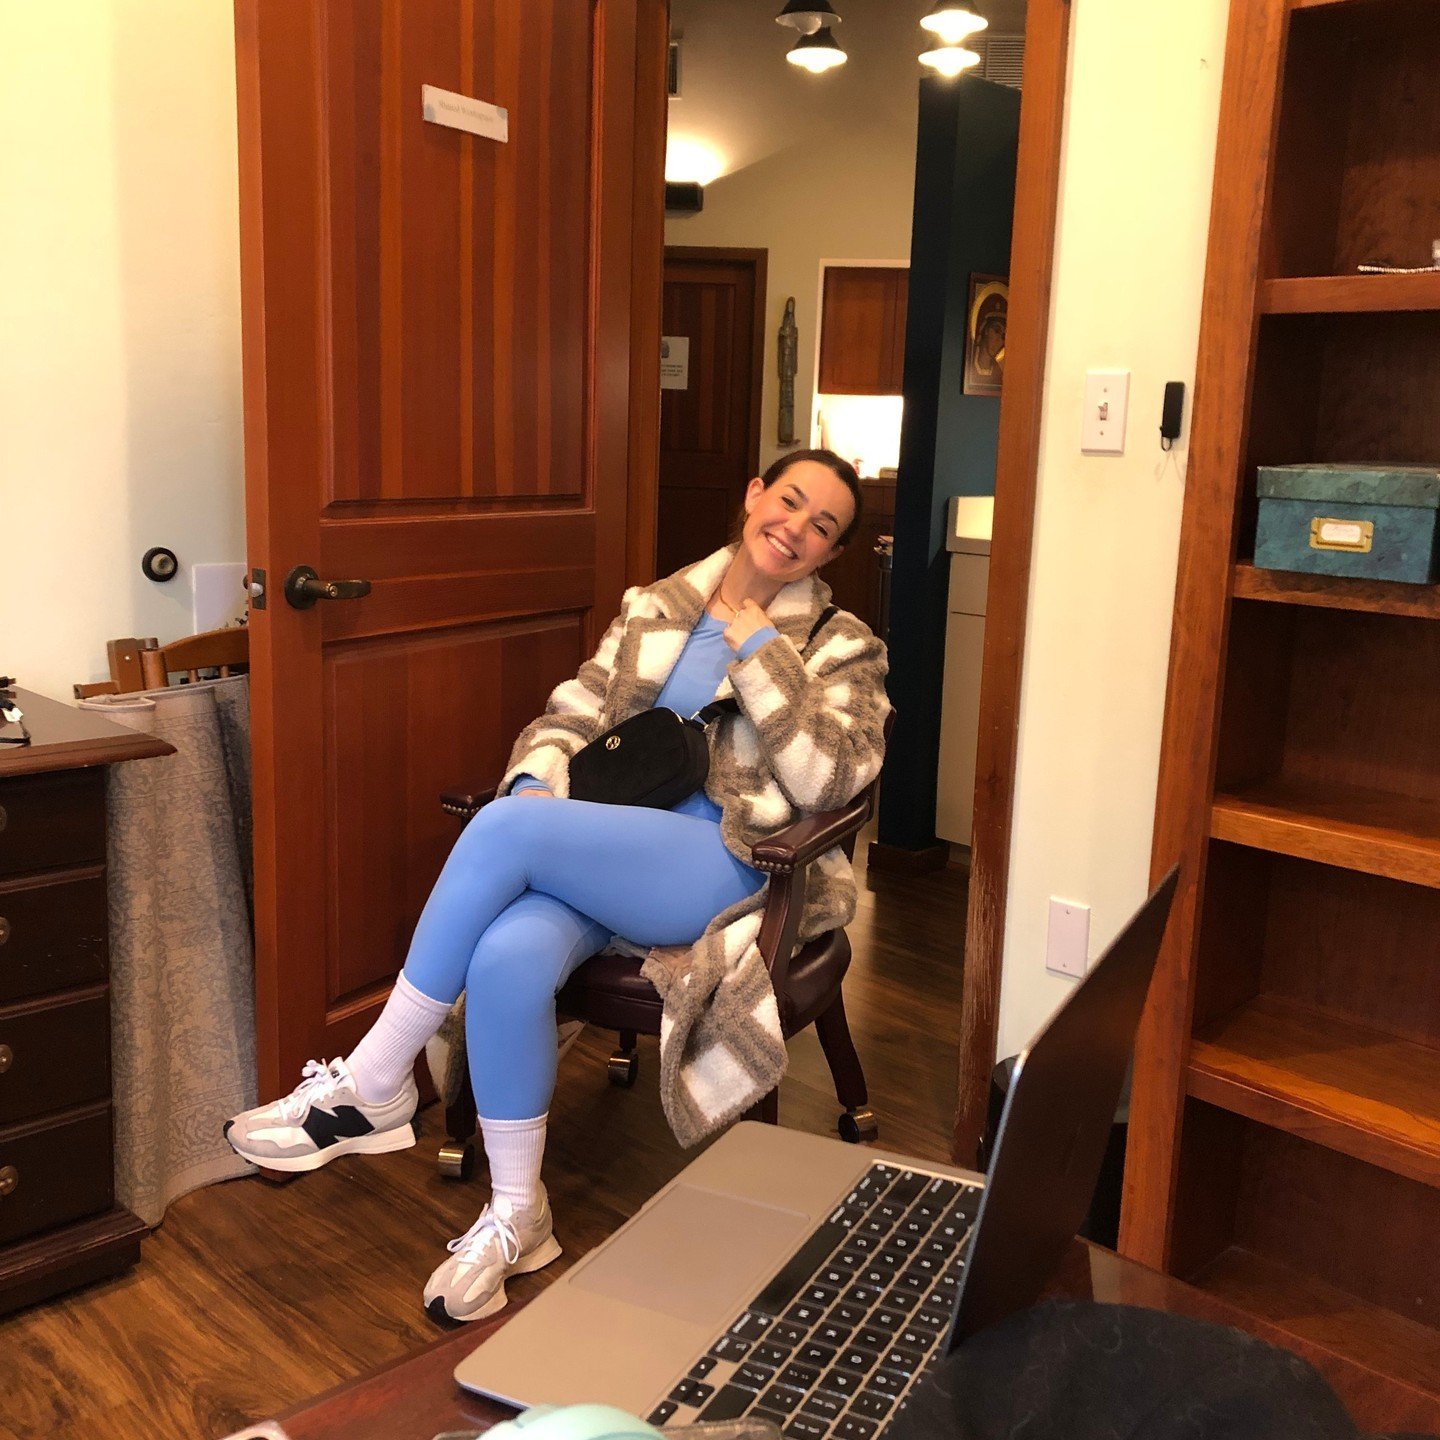 BTS Time! Our illustrious Facilities Manager Abigail, hard at work in the office!  #facilitiesmanager #intheoffice #bts #stpetersdelmar #church